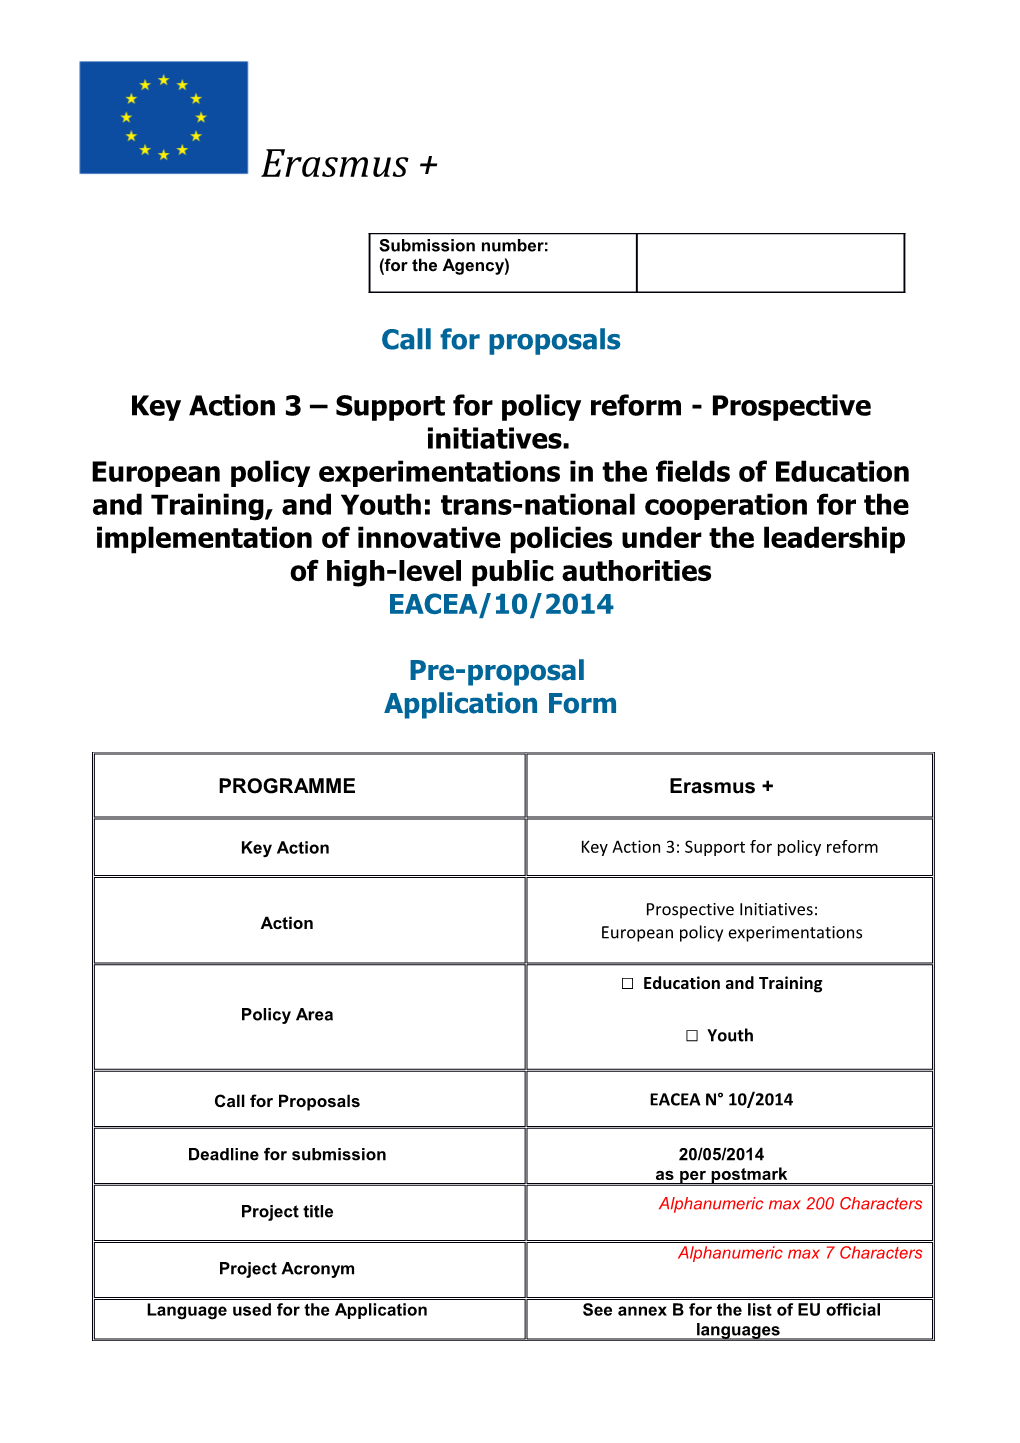 Key Action 3 Support for Policy Reform - Prospective Initiatives